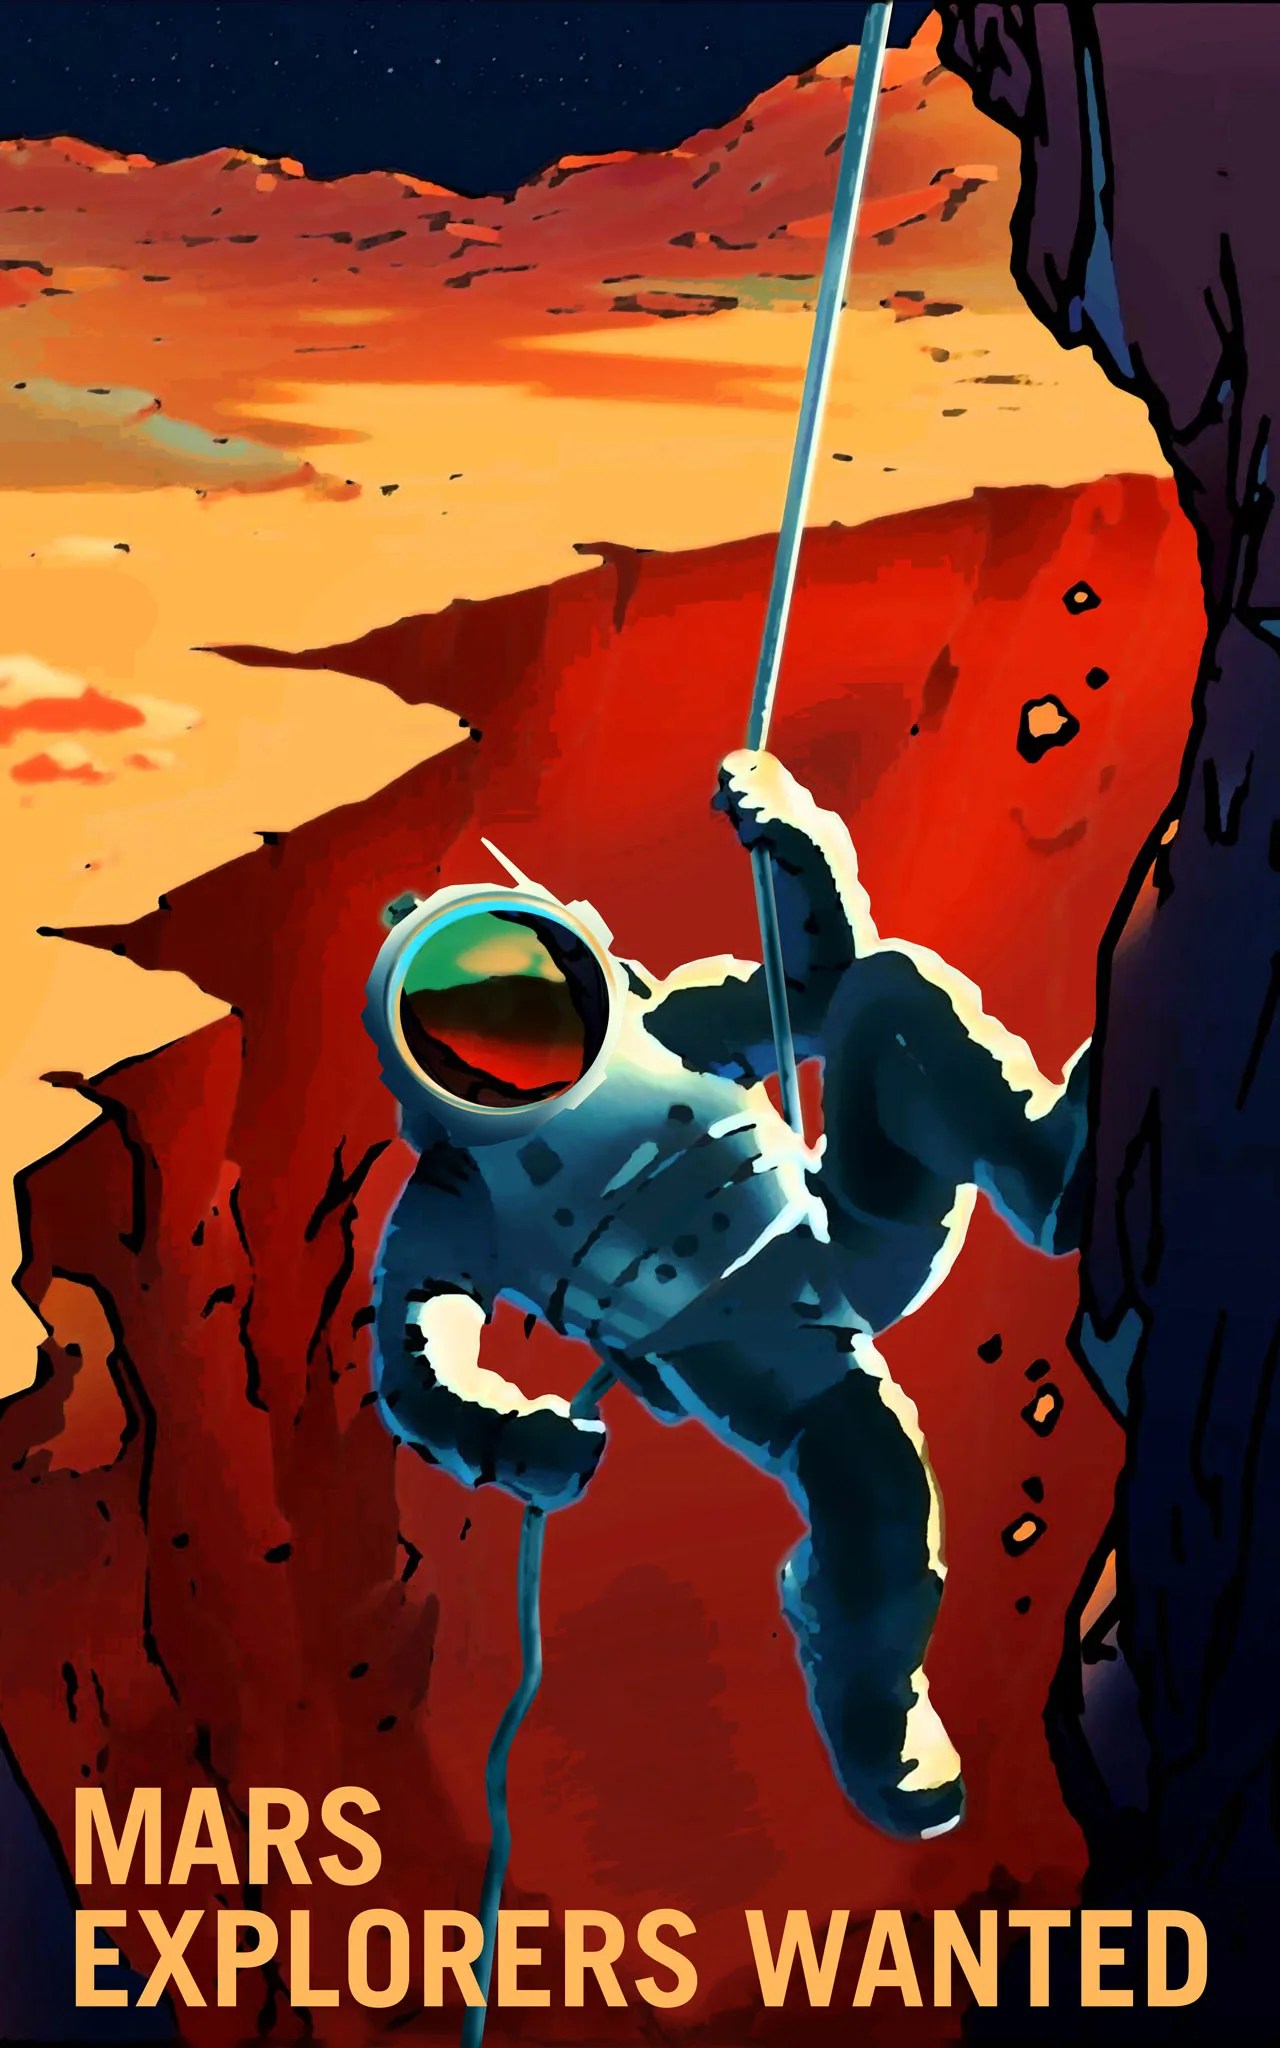 Illustration of astronaut repelling down the side of Valles Marineris.